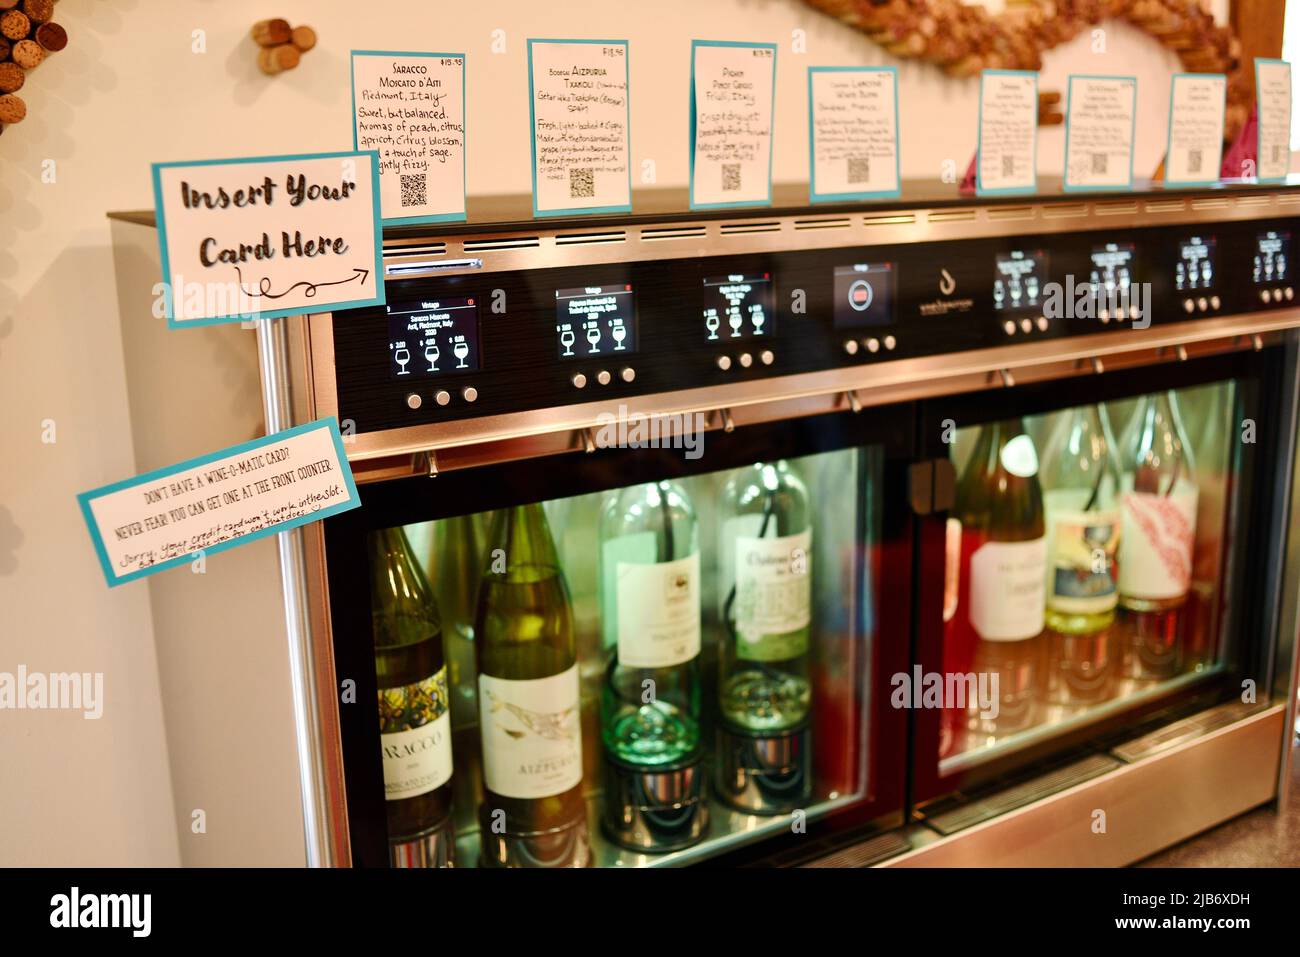 https://c8.alamy.com/comp/2JB6XDH/innovative-automated-wine-preservation-and-dispensing-system-wine-e-motion-using-wine-o-matic-card-featured-at-vintage-elkhart-lake-wisconsin-usa-2JB6XDH.jpg